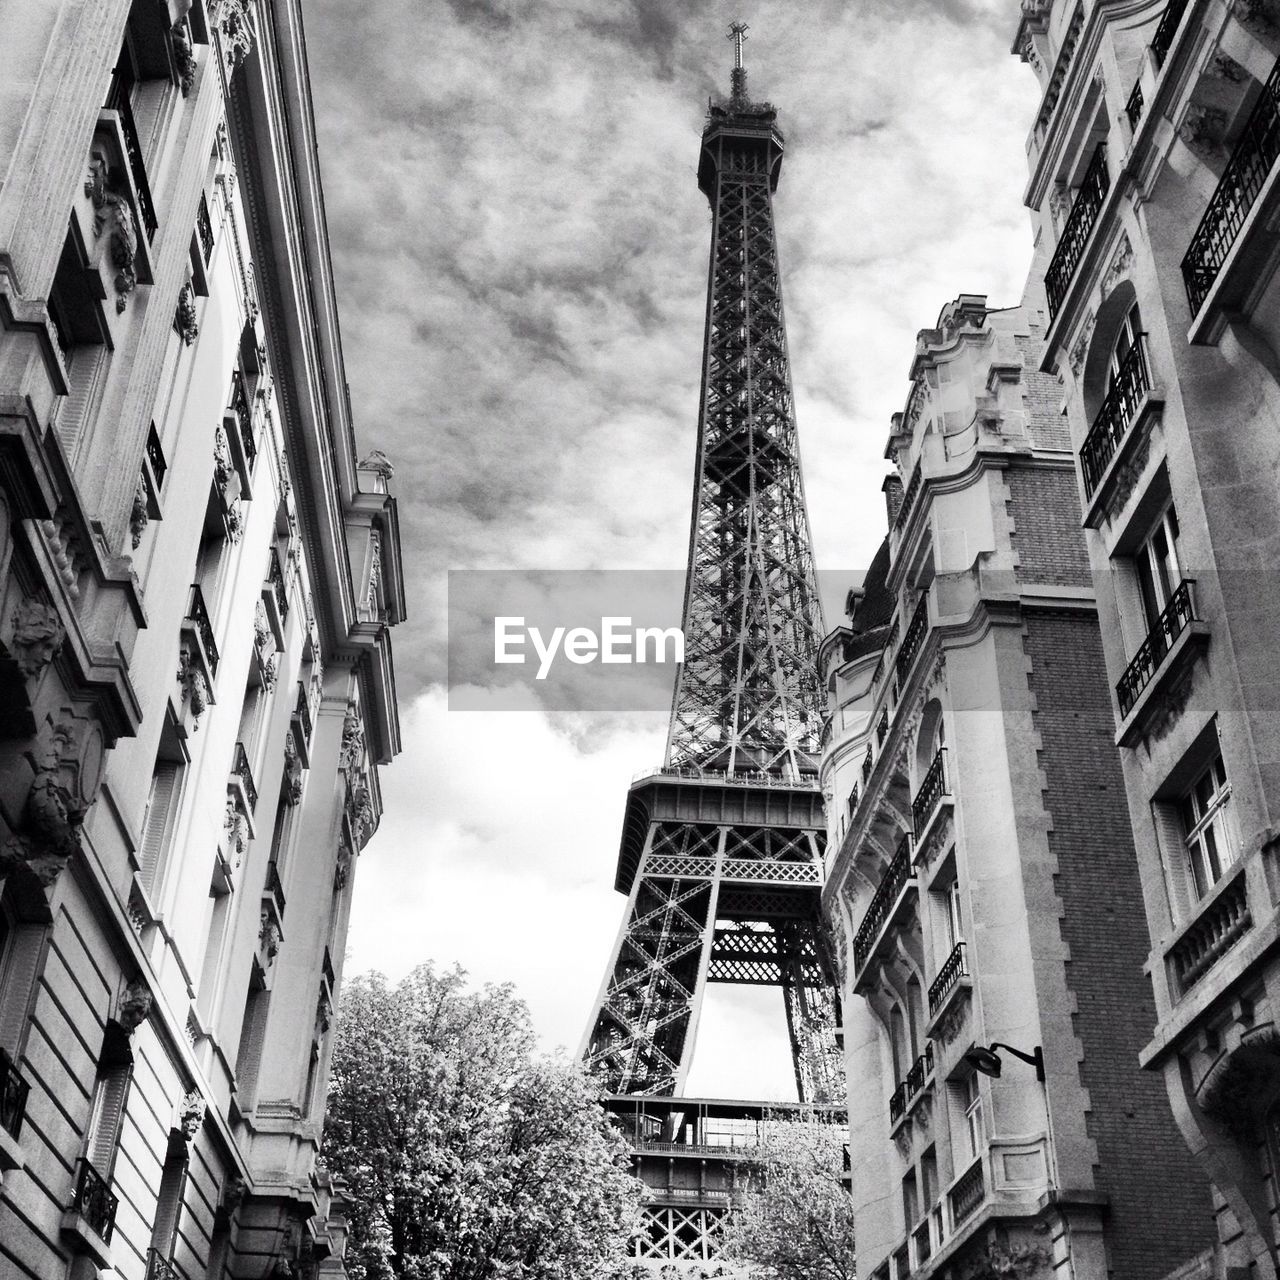 Low angle view of eiffel tower amidst buildings in city against cloudy sky